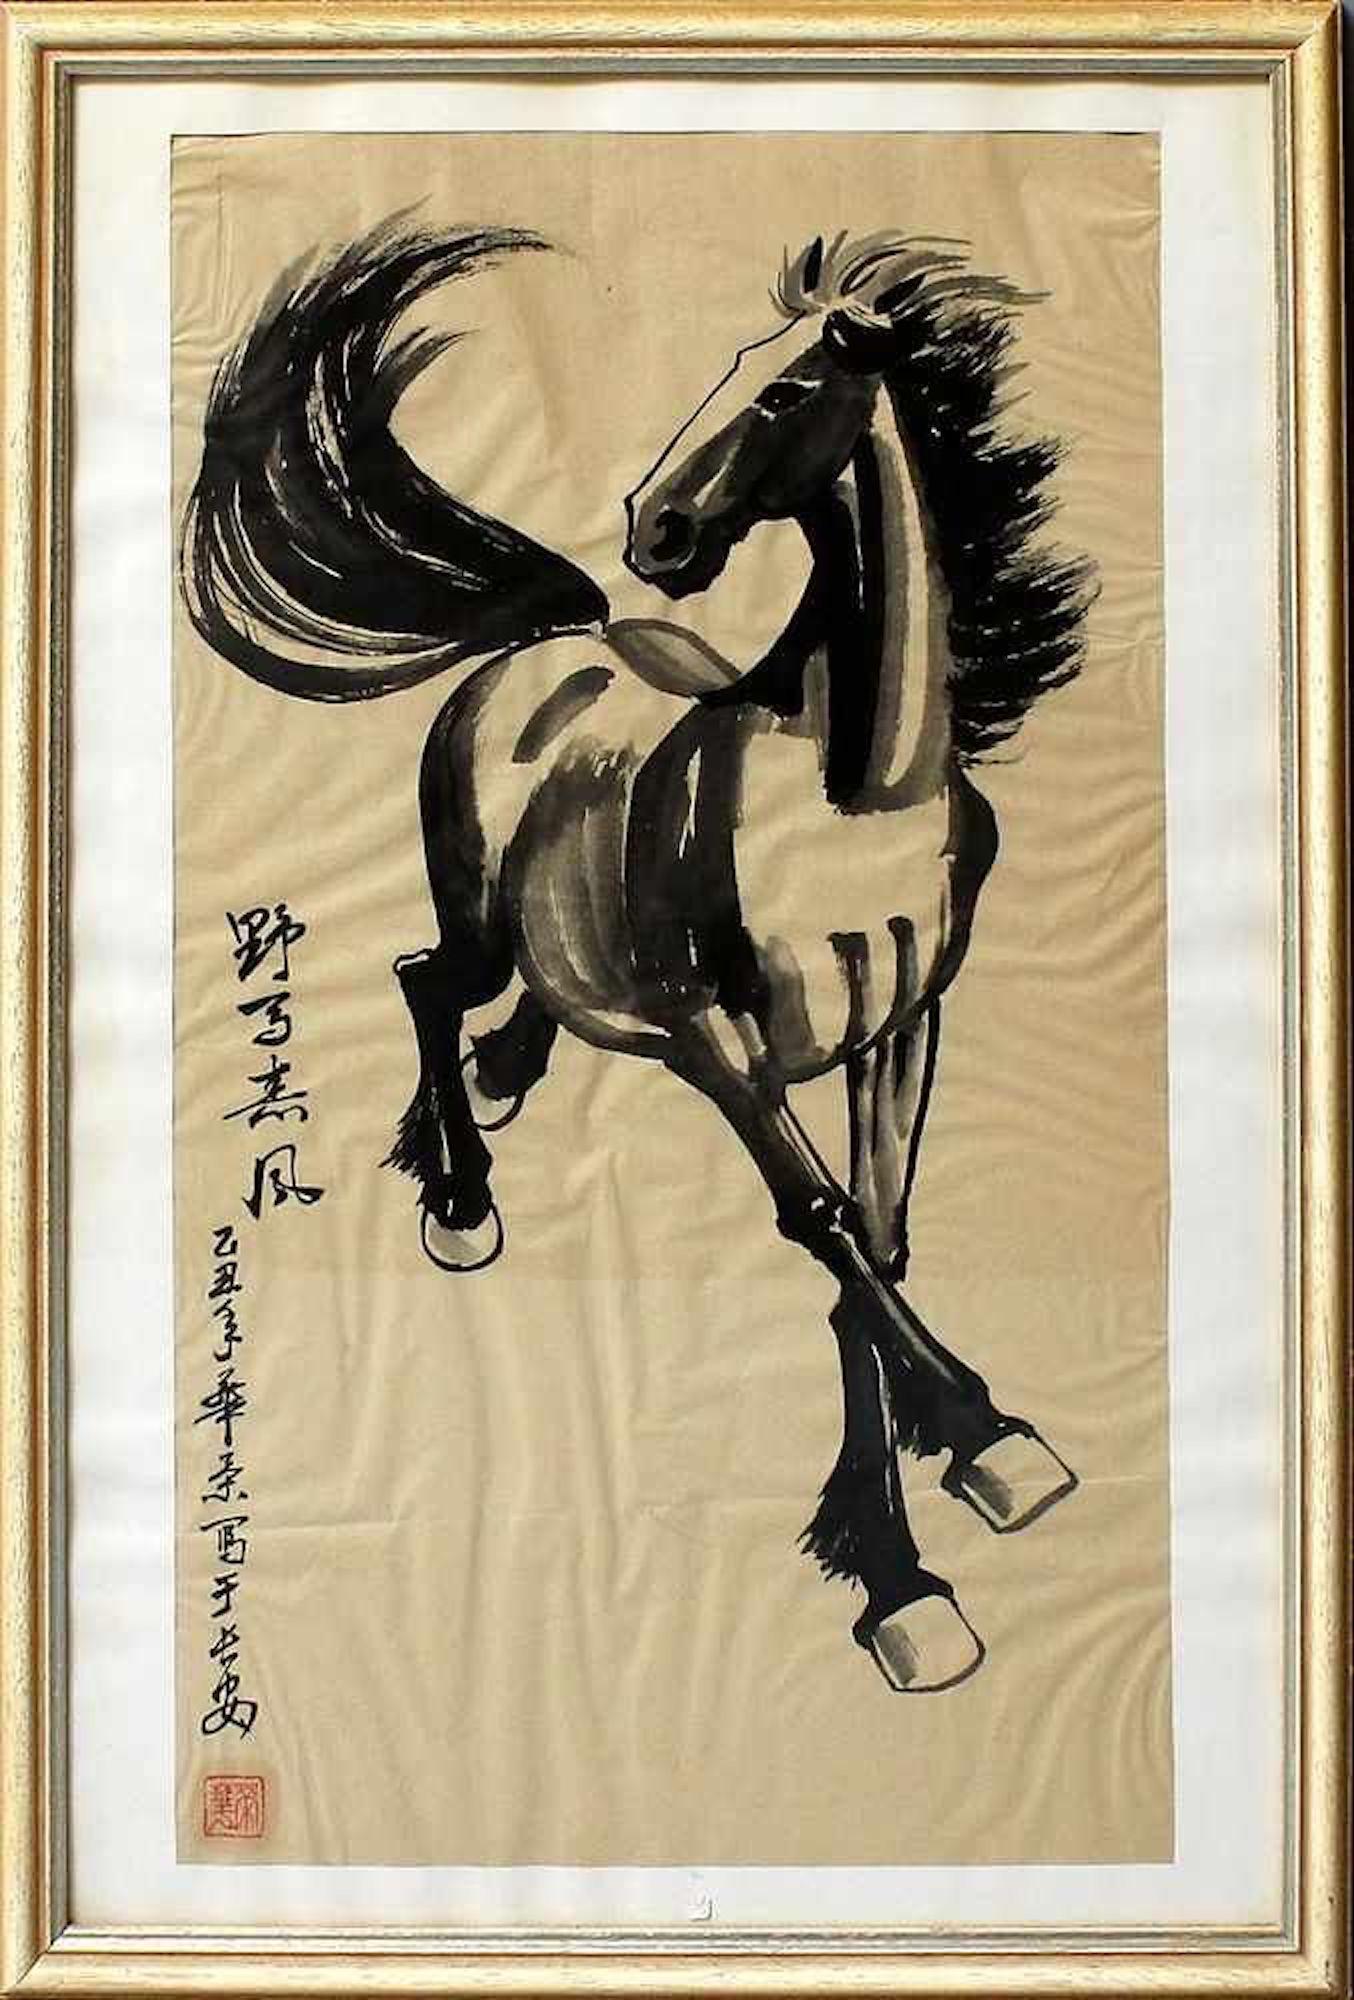 Unknown Animal Art - Black Horse - China Ink by Chinese Master Early 20th Century